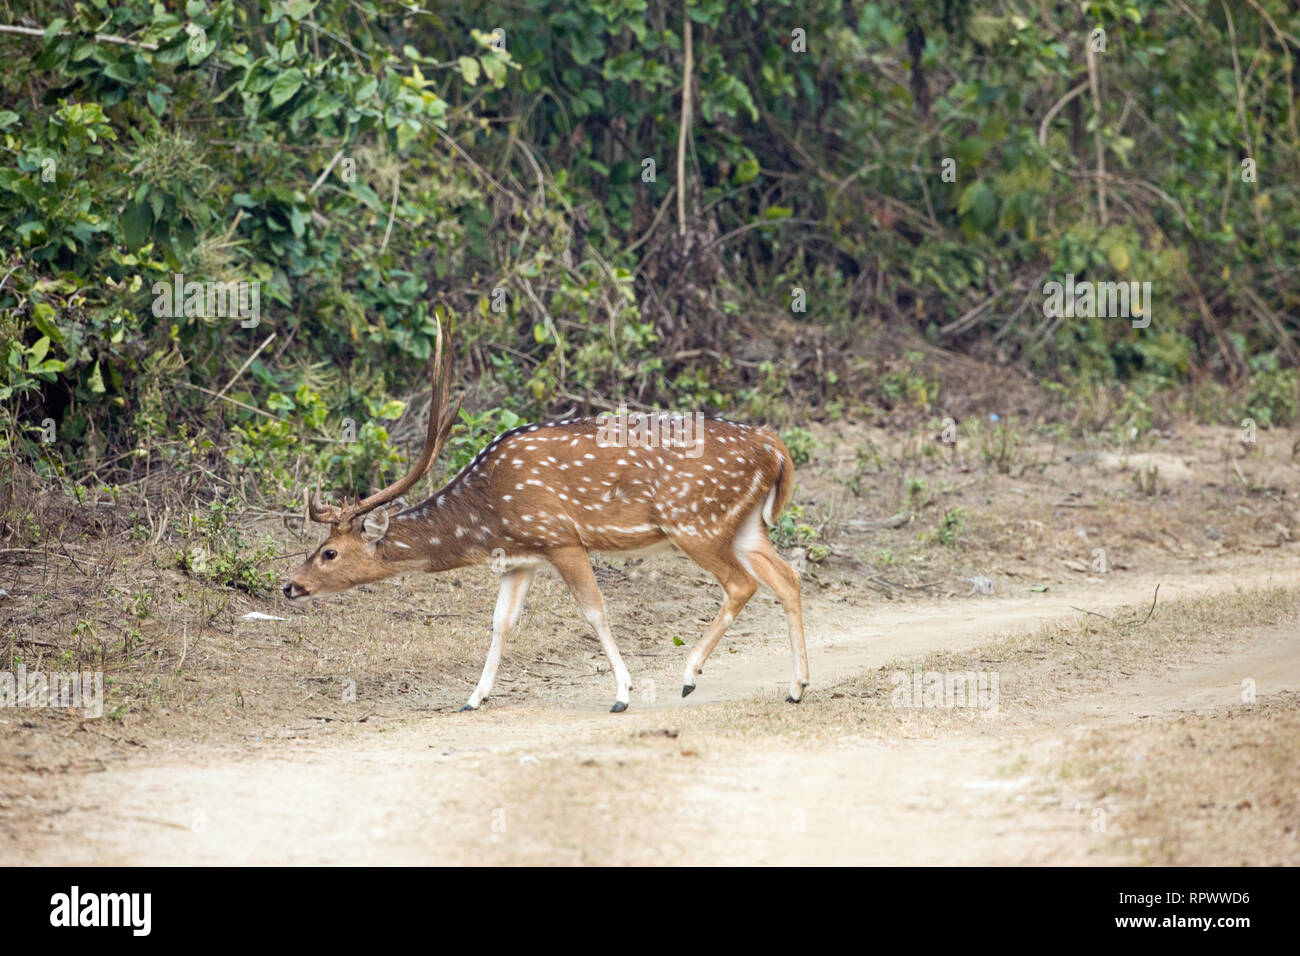 Chital, or Axis or Spotted Deer, (Axis axis).  Stag, or male, investigating litter dropped alongside a vehicle trail by a visitor to Corbett National  Stock Photo